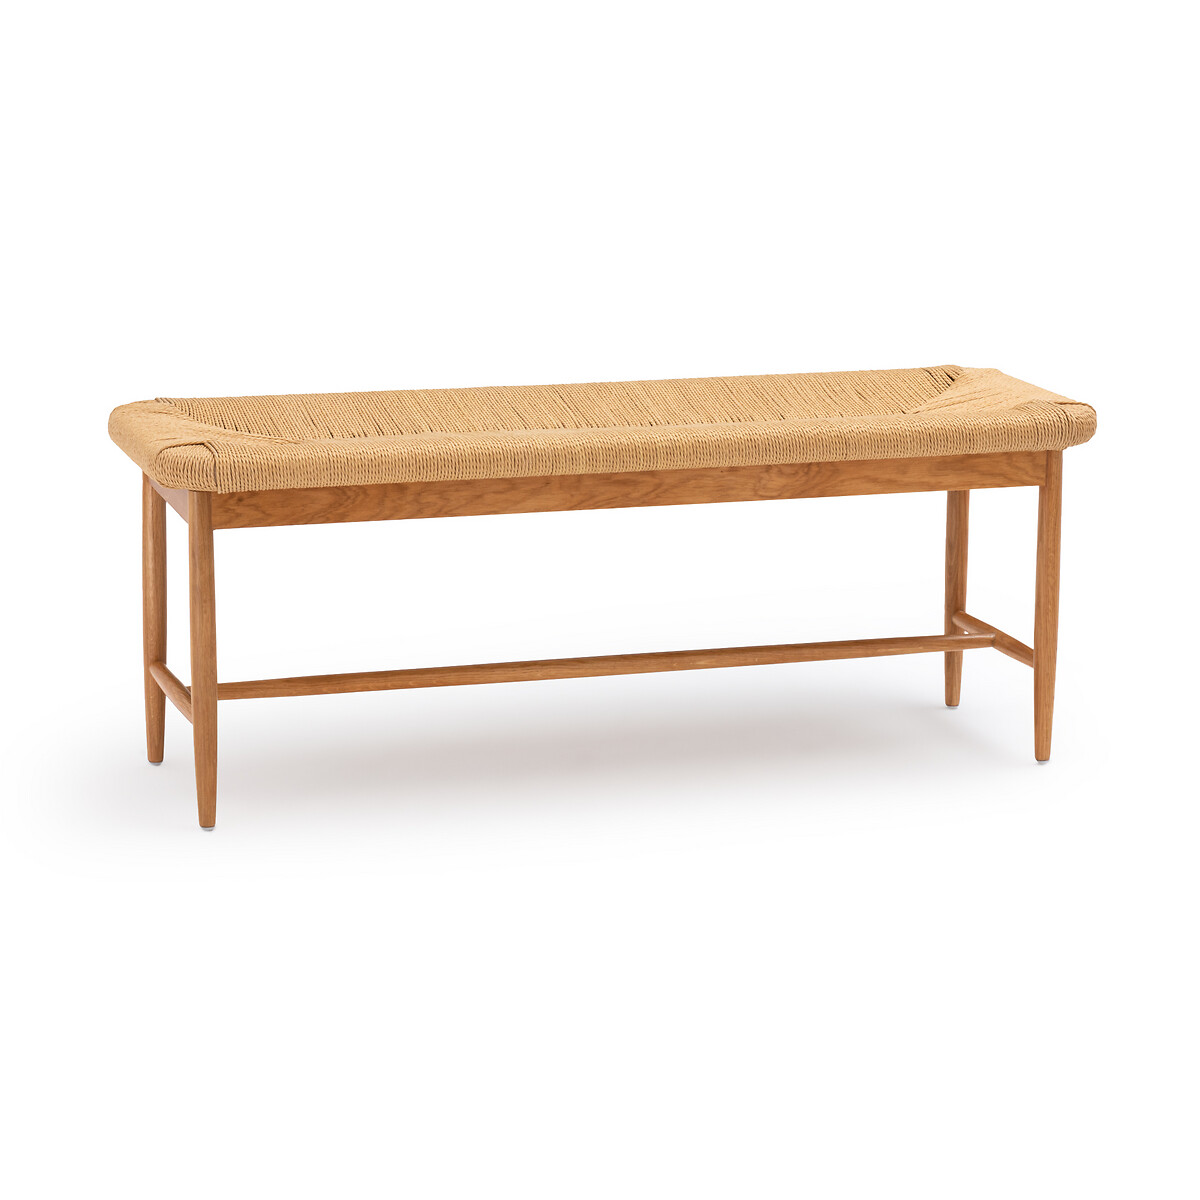 Andre 120cm Solid Oak Bench with Woven Seat